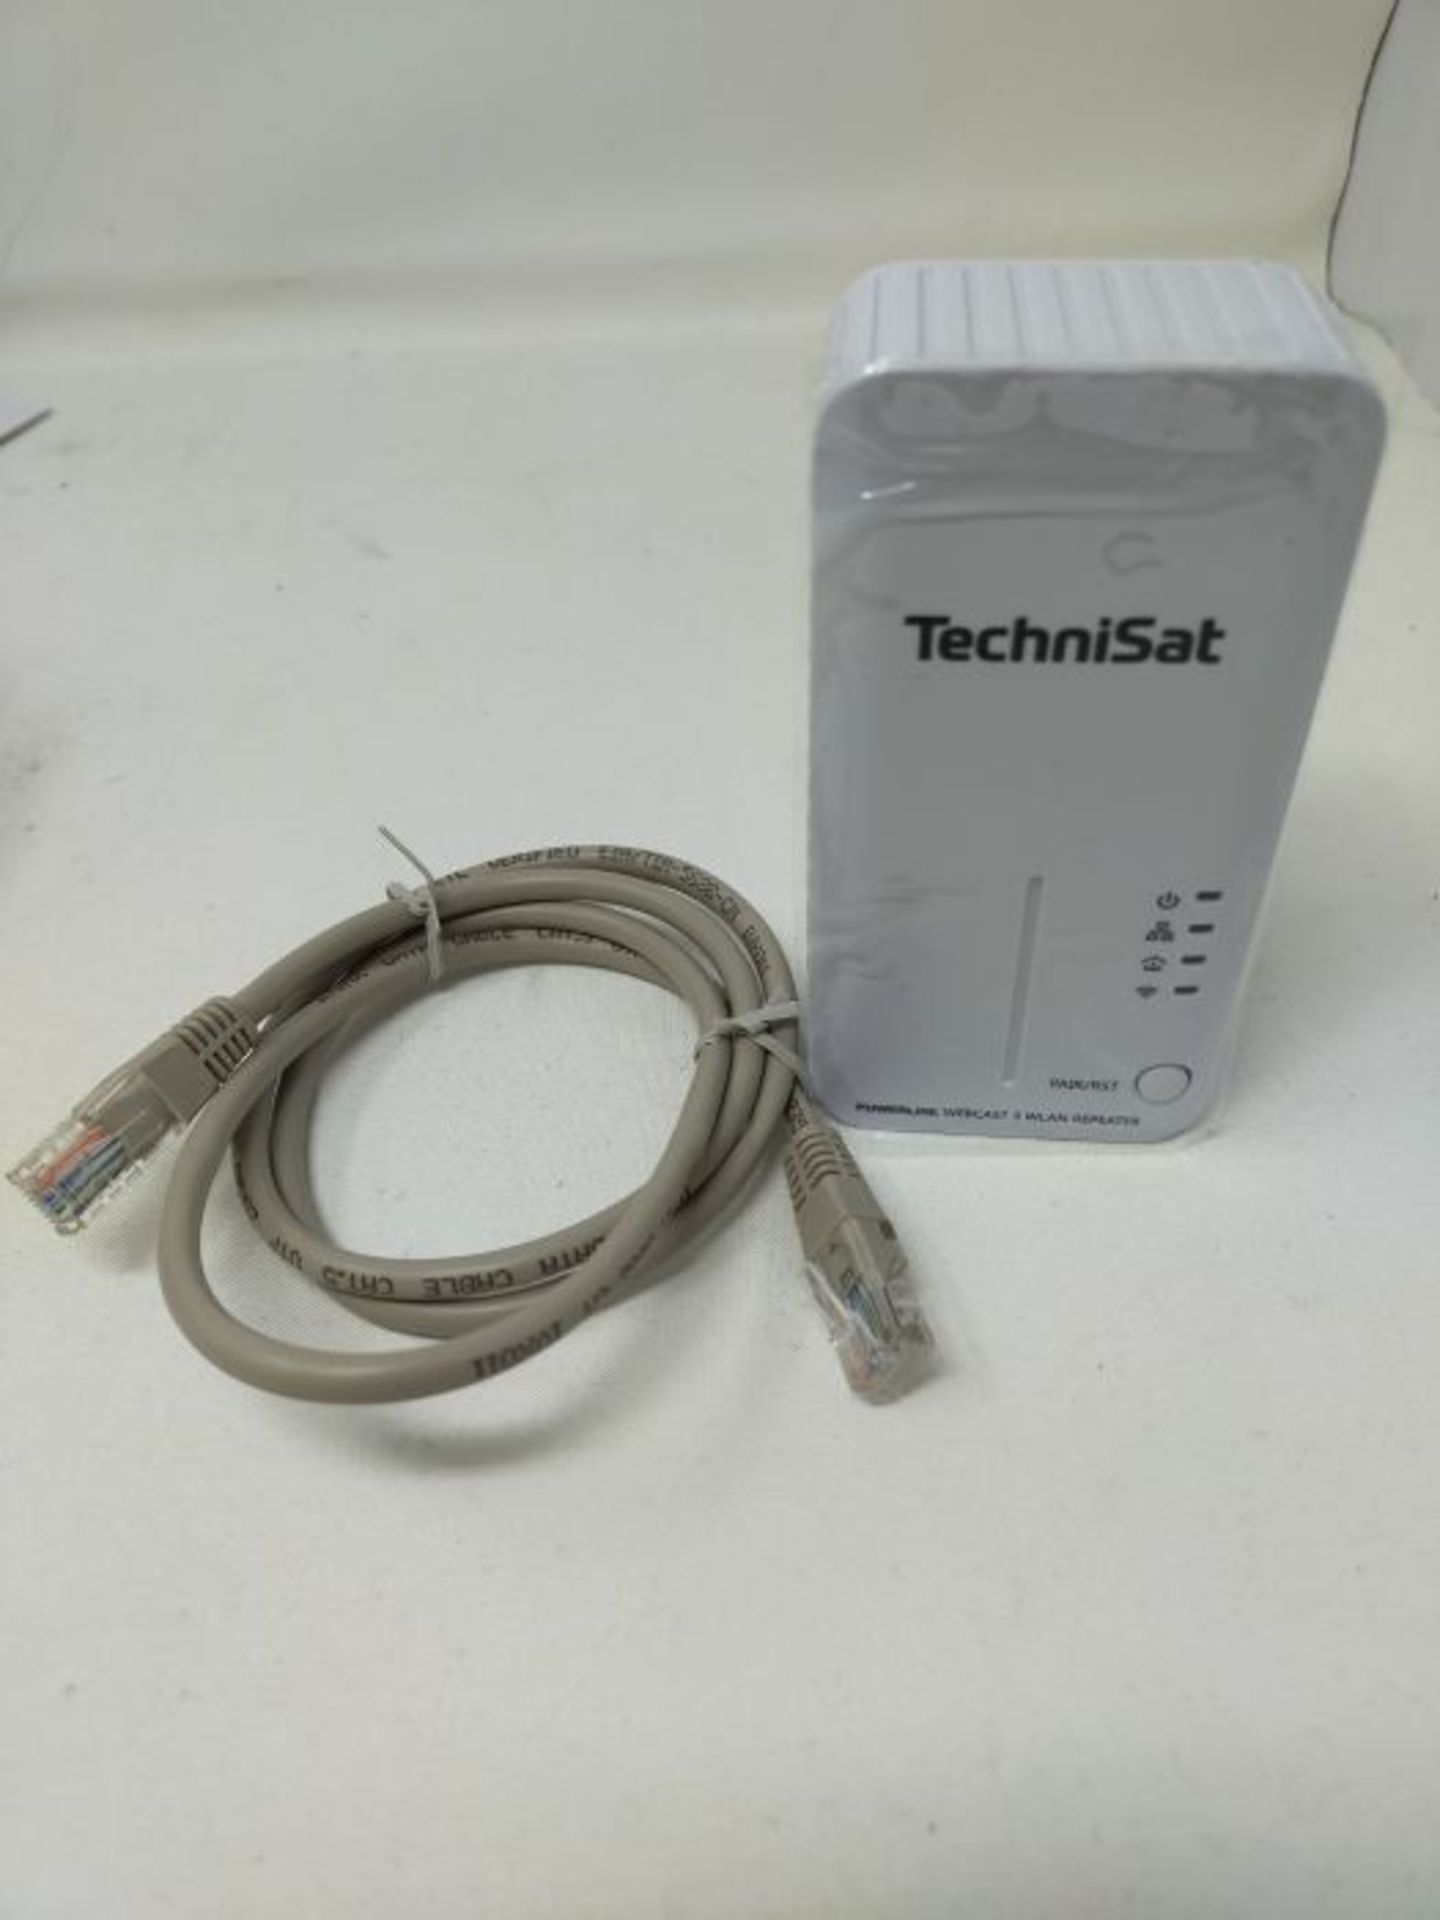 TechniSat Powerline WebCast 3 WLAN Repeater (to extend the range of existing WLAN netw - Image 3 of 3